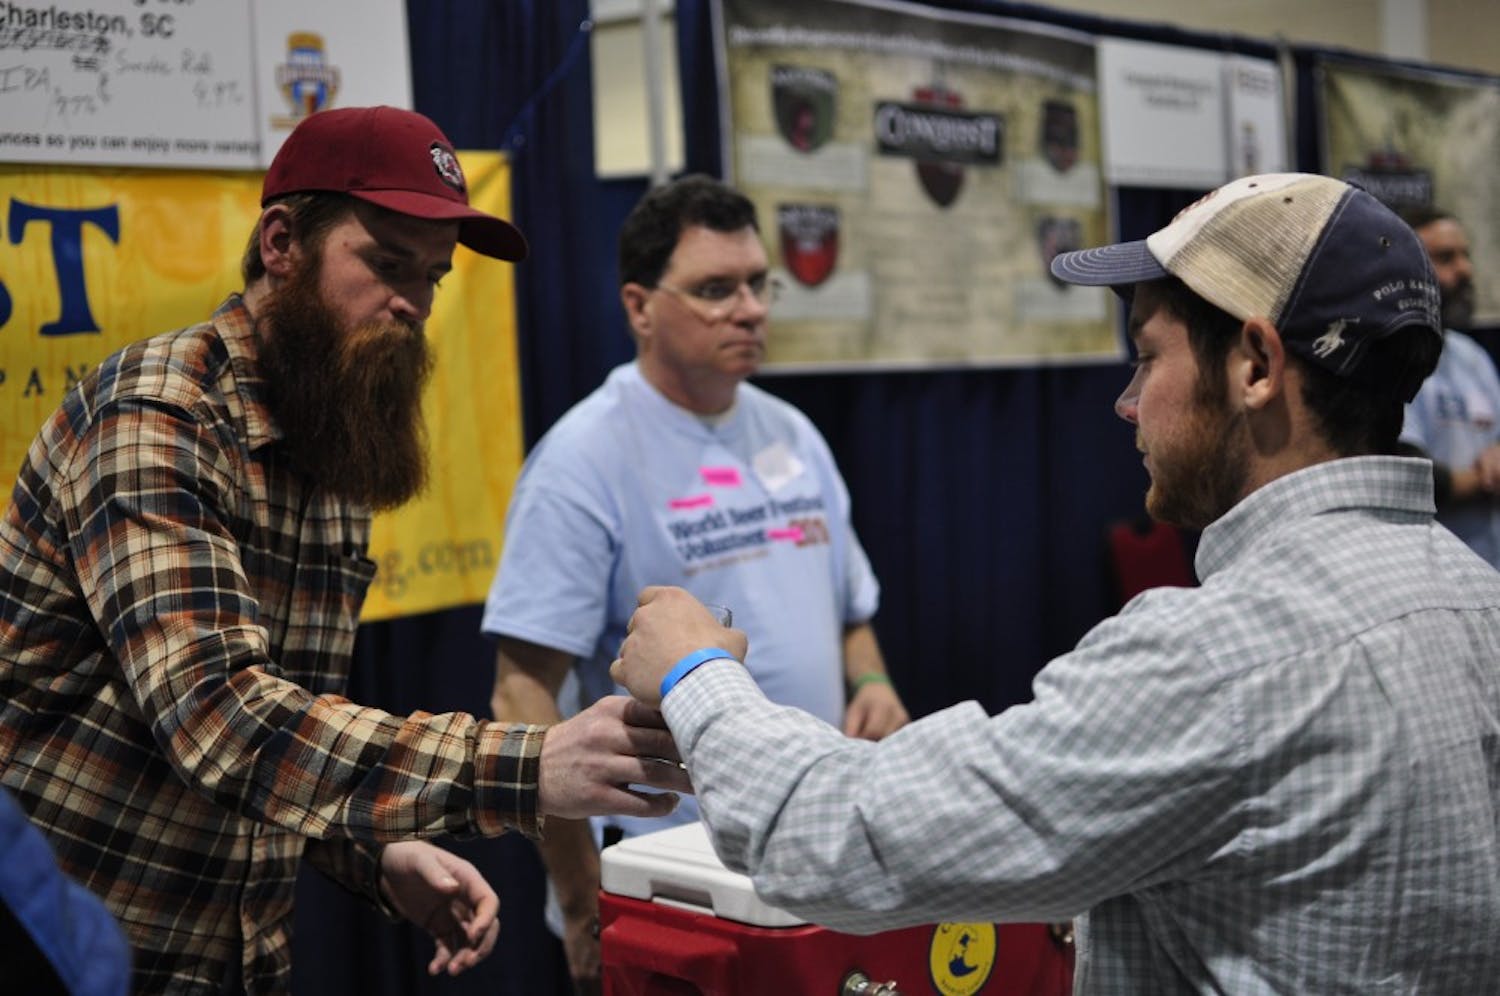 	The 6th annual World Beer Festival returned to the Columbia Convention Center on Jan. 18 with pools of beer, dudes in lederhosen and thousands of pretzel necklaces. Tasters of all kinds (from the seasoned beer snob to the college student with a pallet accustomed to Natural Light) perused taps from dozens of breweries, filled complimentary tasting glasses with generous samples of over 150 craft flavors and fought through 5 p.m. hangovers.